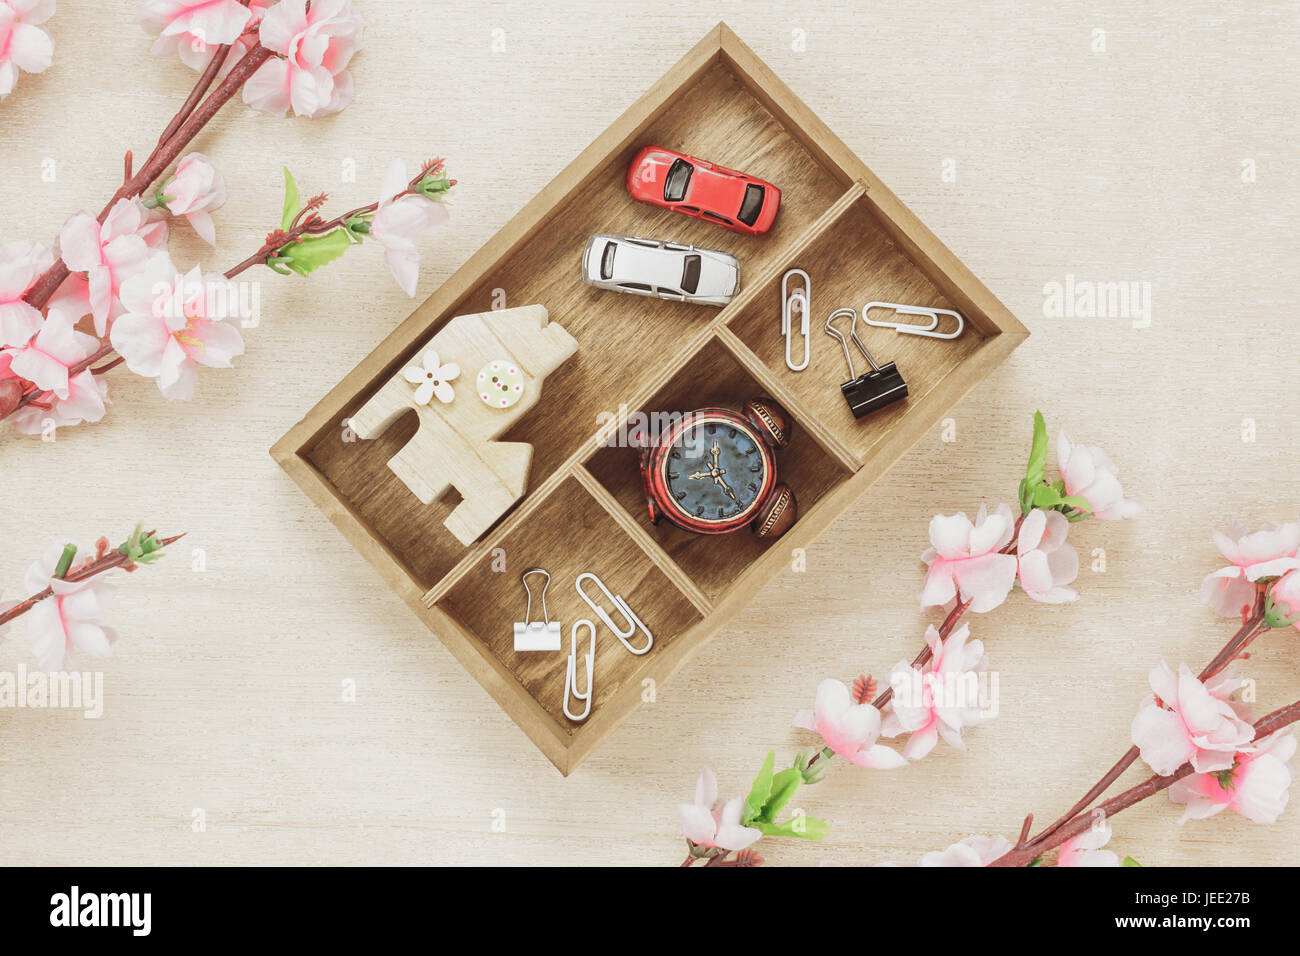 Top view business office desk concept. Wood house  also car and clock on wooden shelf.The beautiful pink flower on wood background with copy space. Stock Photo